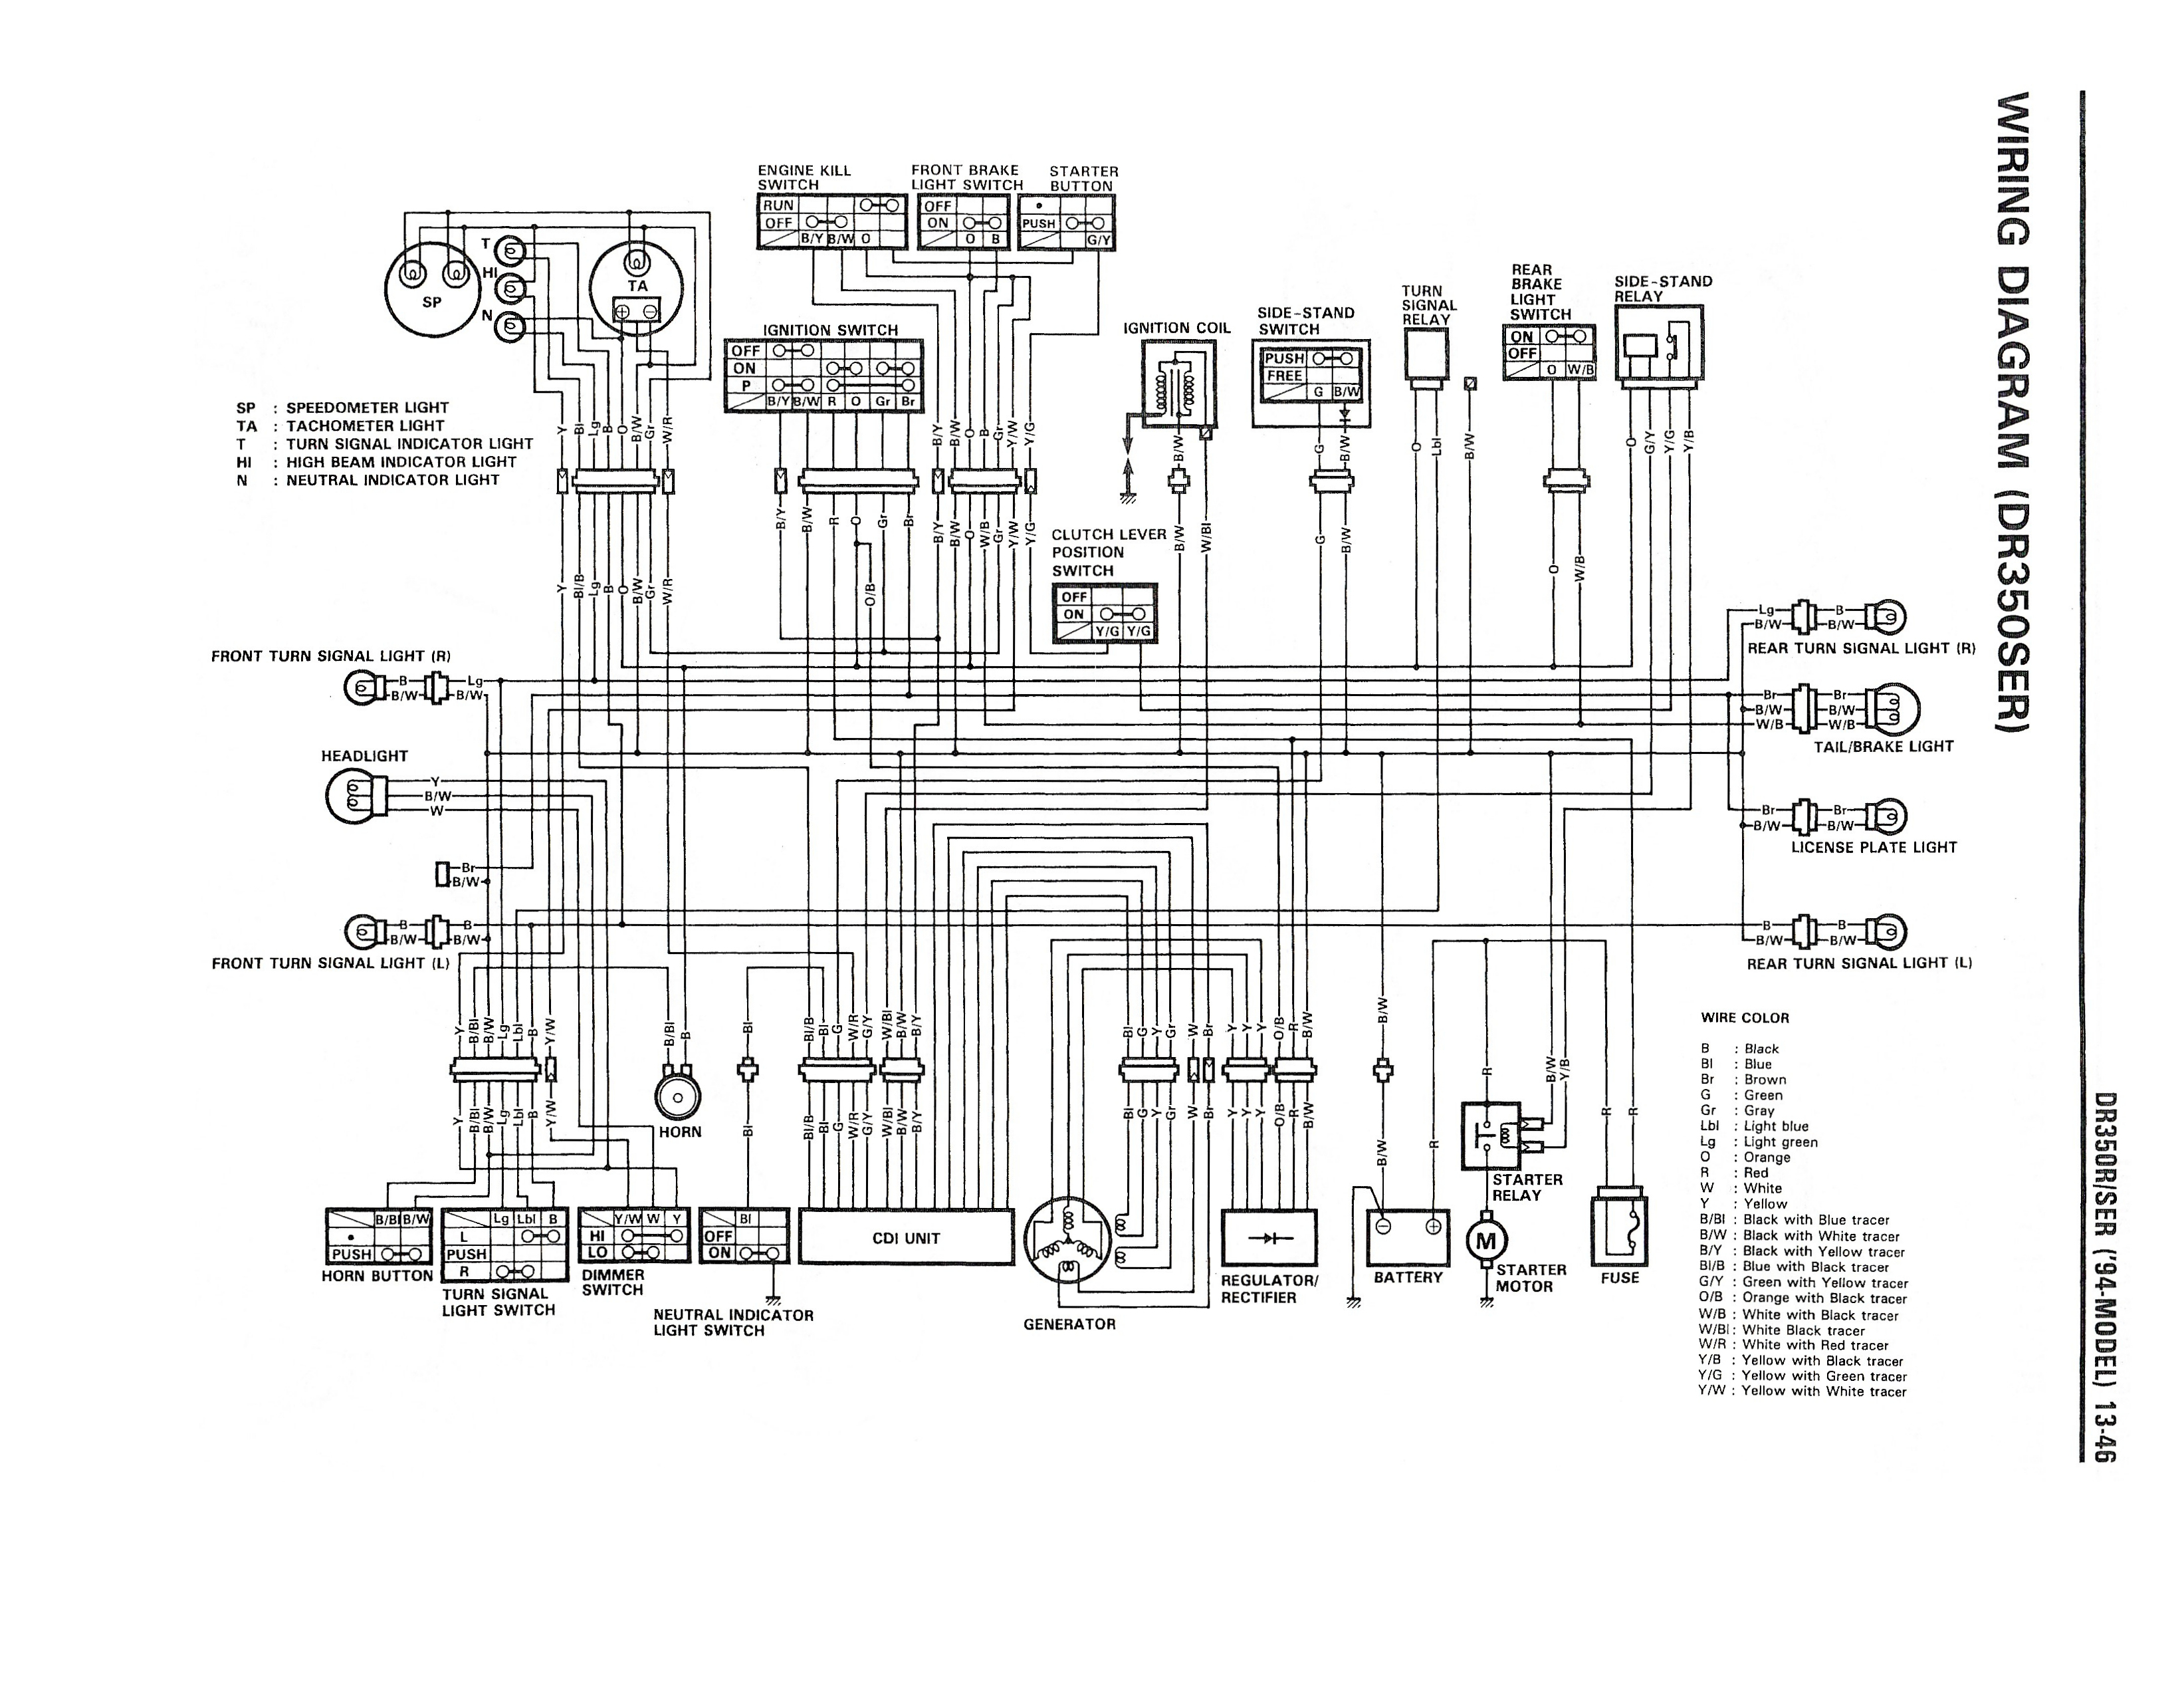 Wiring diagram for the DR350 SE (1994 and later models ... opel kadett cub wiring diagram 